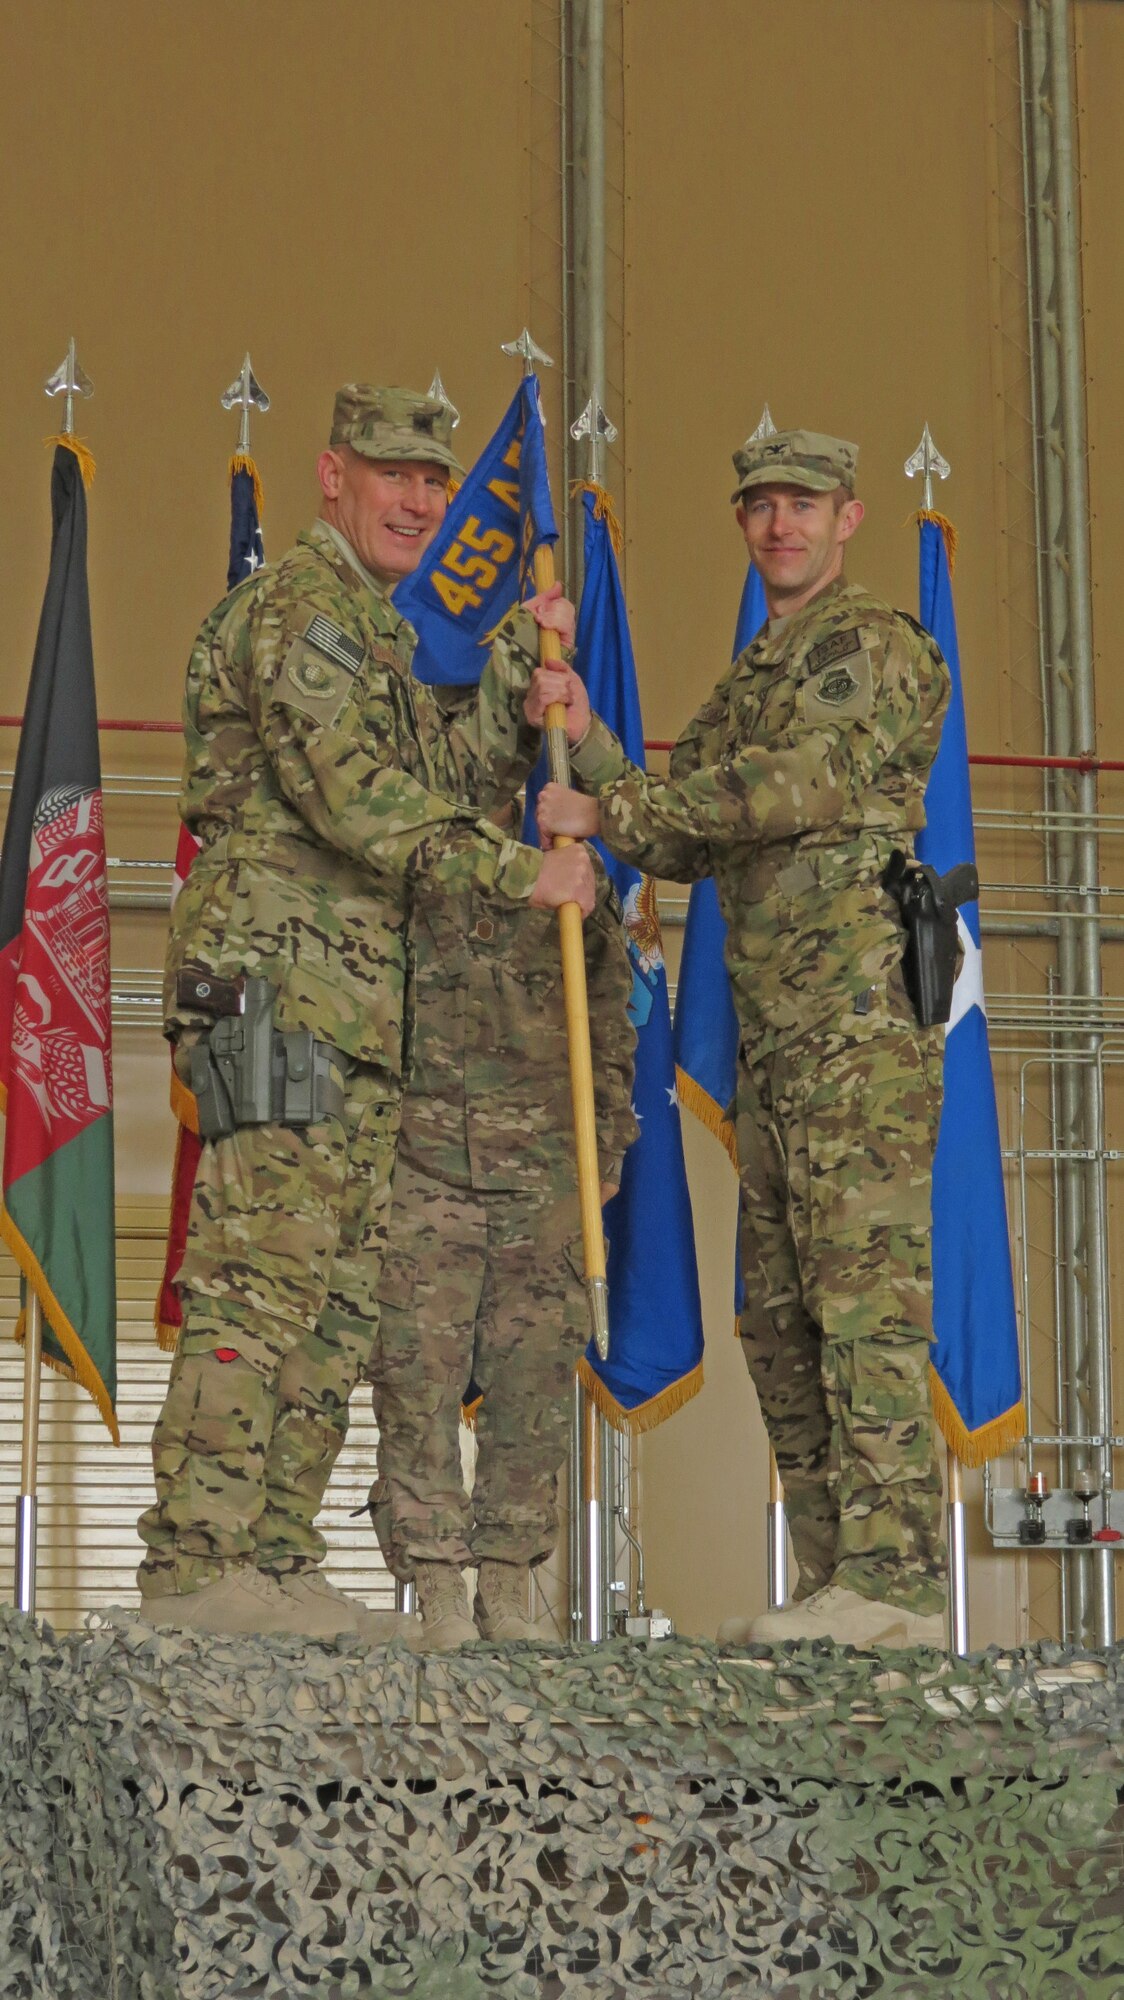 U.S. Air Force Col. Scott Campbell, 451st Air Expeditionary Group commander, receives the new 451st AEG guidon from Brig. Gen. Patrick Malackowski, 455th Air Expeditionary Wing commander, in a transition ceremony at Kandahar Airfield, Afghanistan, Jan. 13, 2014. The 451st Air Expeditionary Wing was transitioned to an AEG due to a change in mission.(U.S. Air Force photo by Senior Airman Alexandria Bandin/Released)      